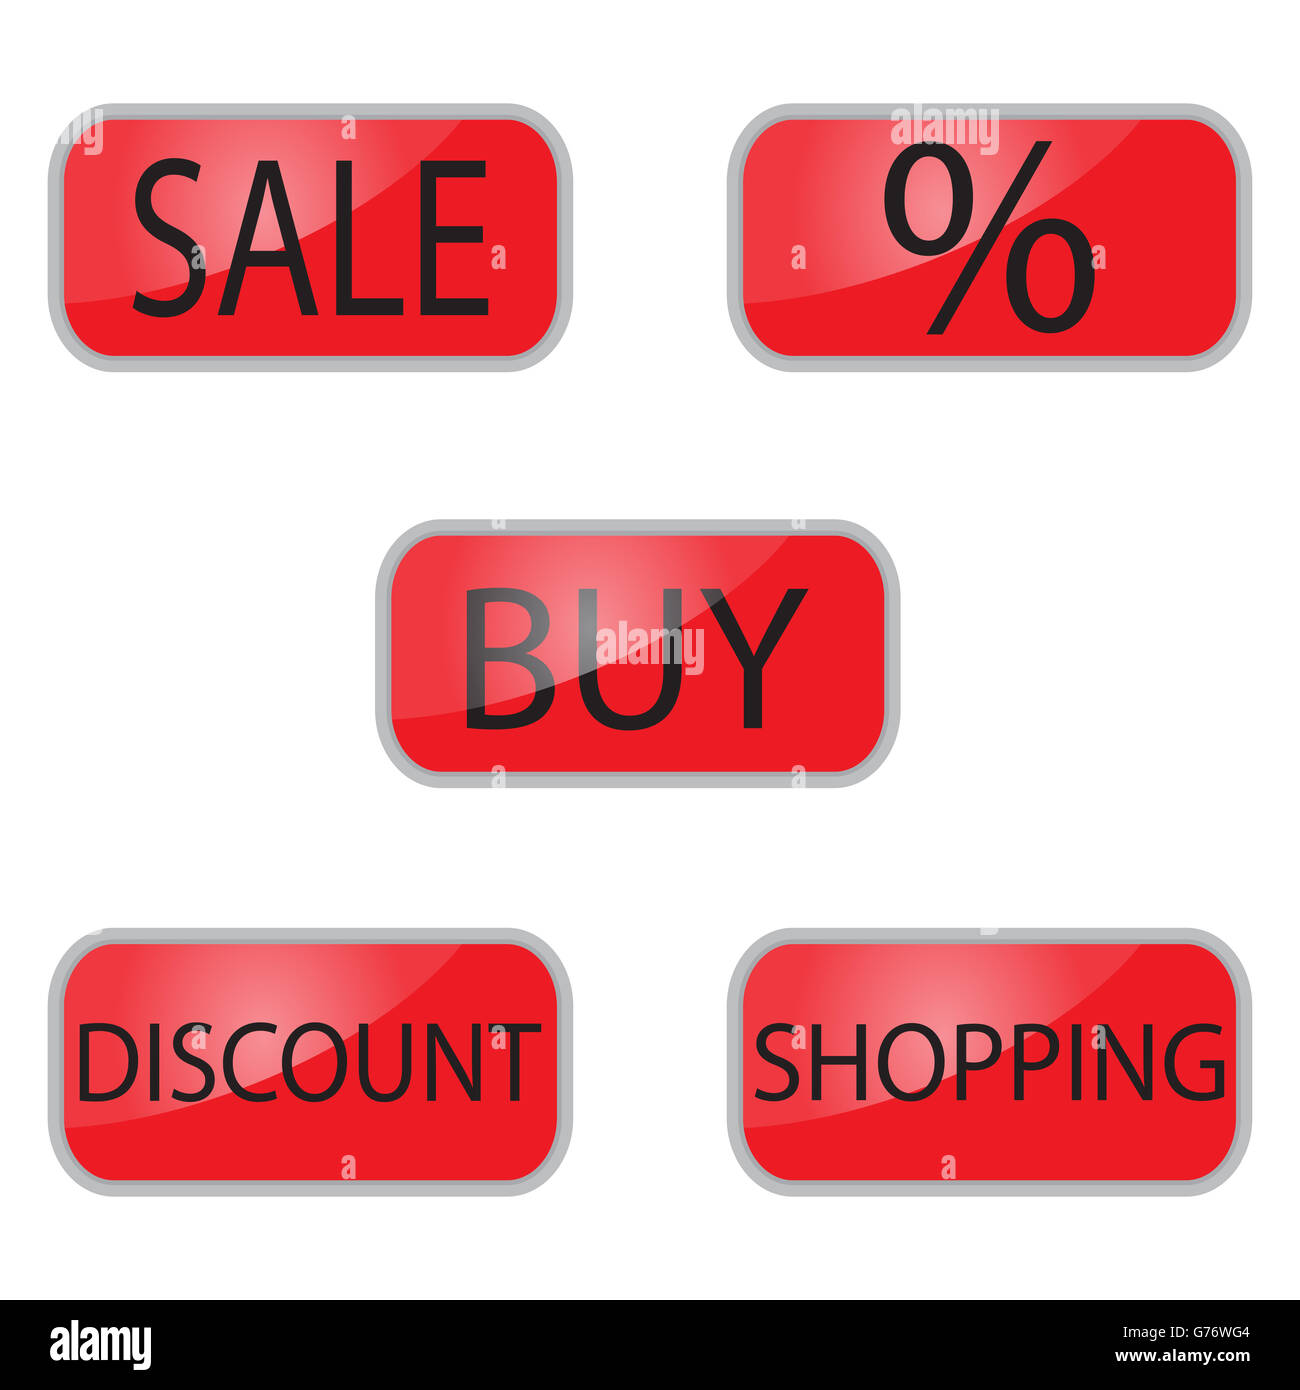 Web red button shooping and online shop Stock Photo